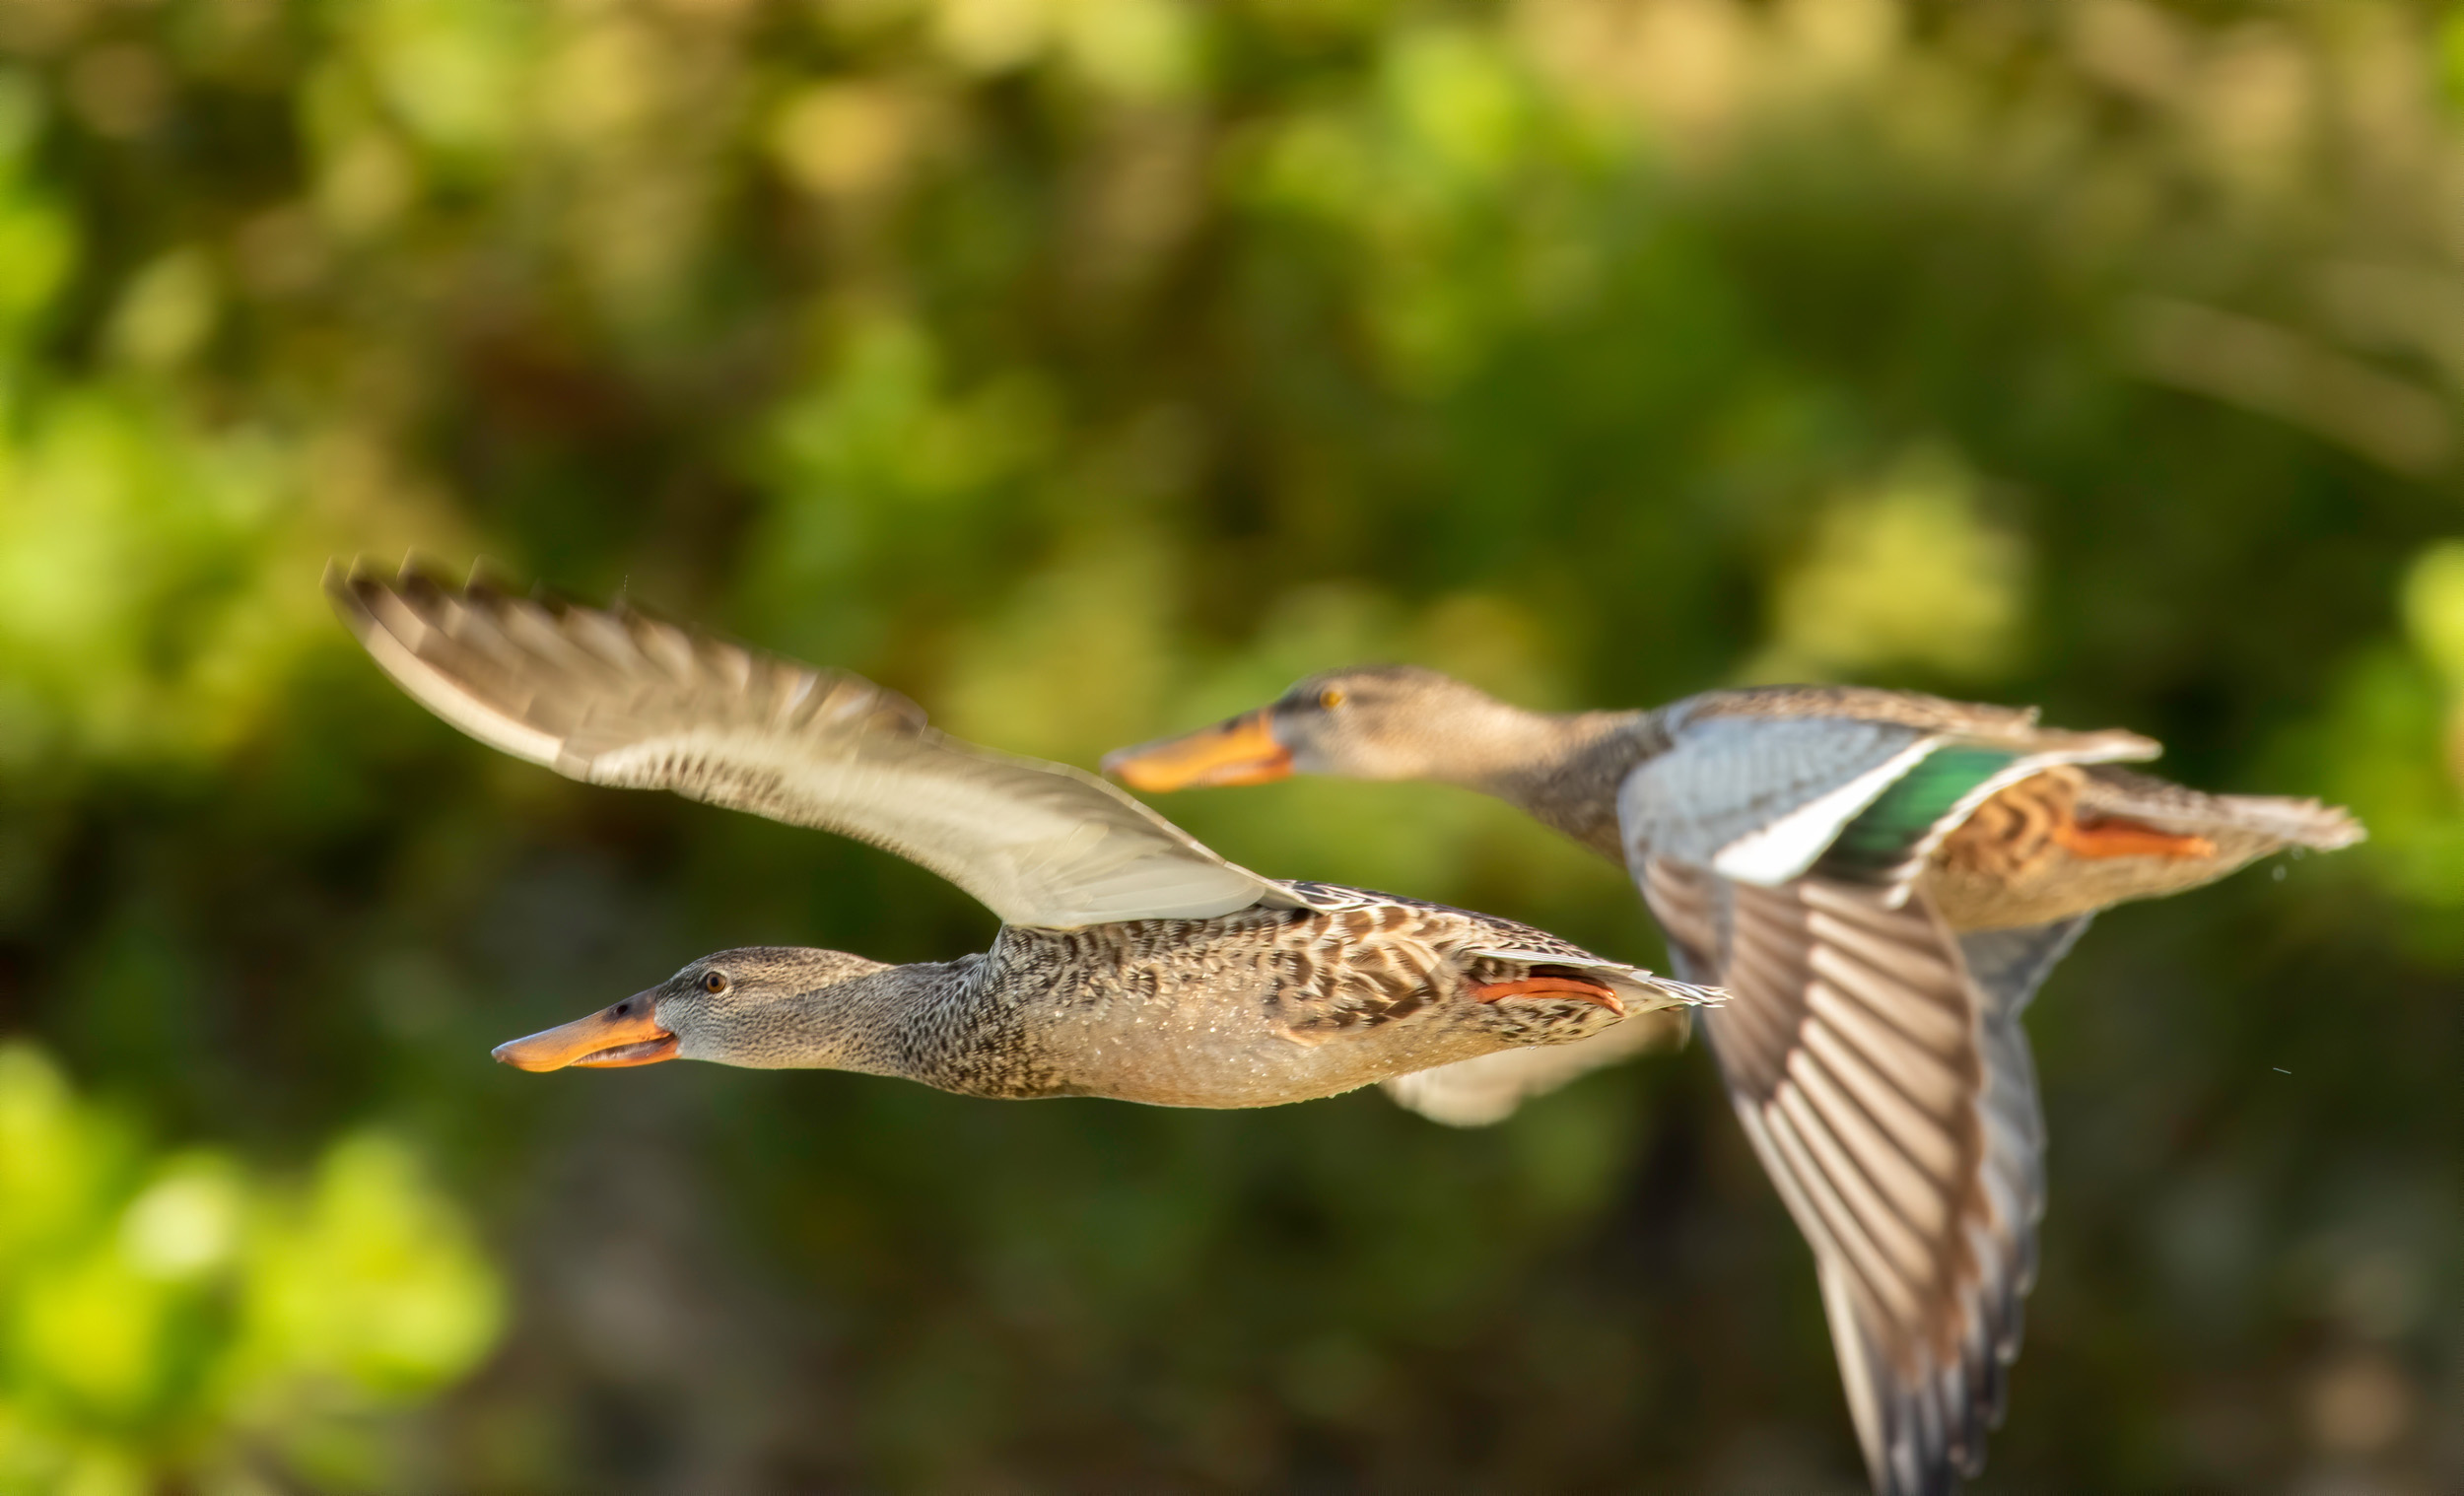 A pair of female Shoveler Ducks in mid flight in front of a forest of trees.